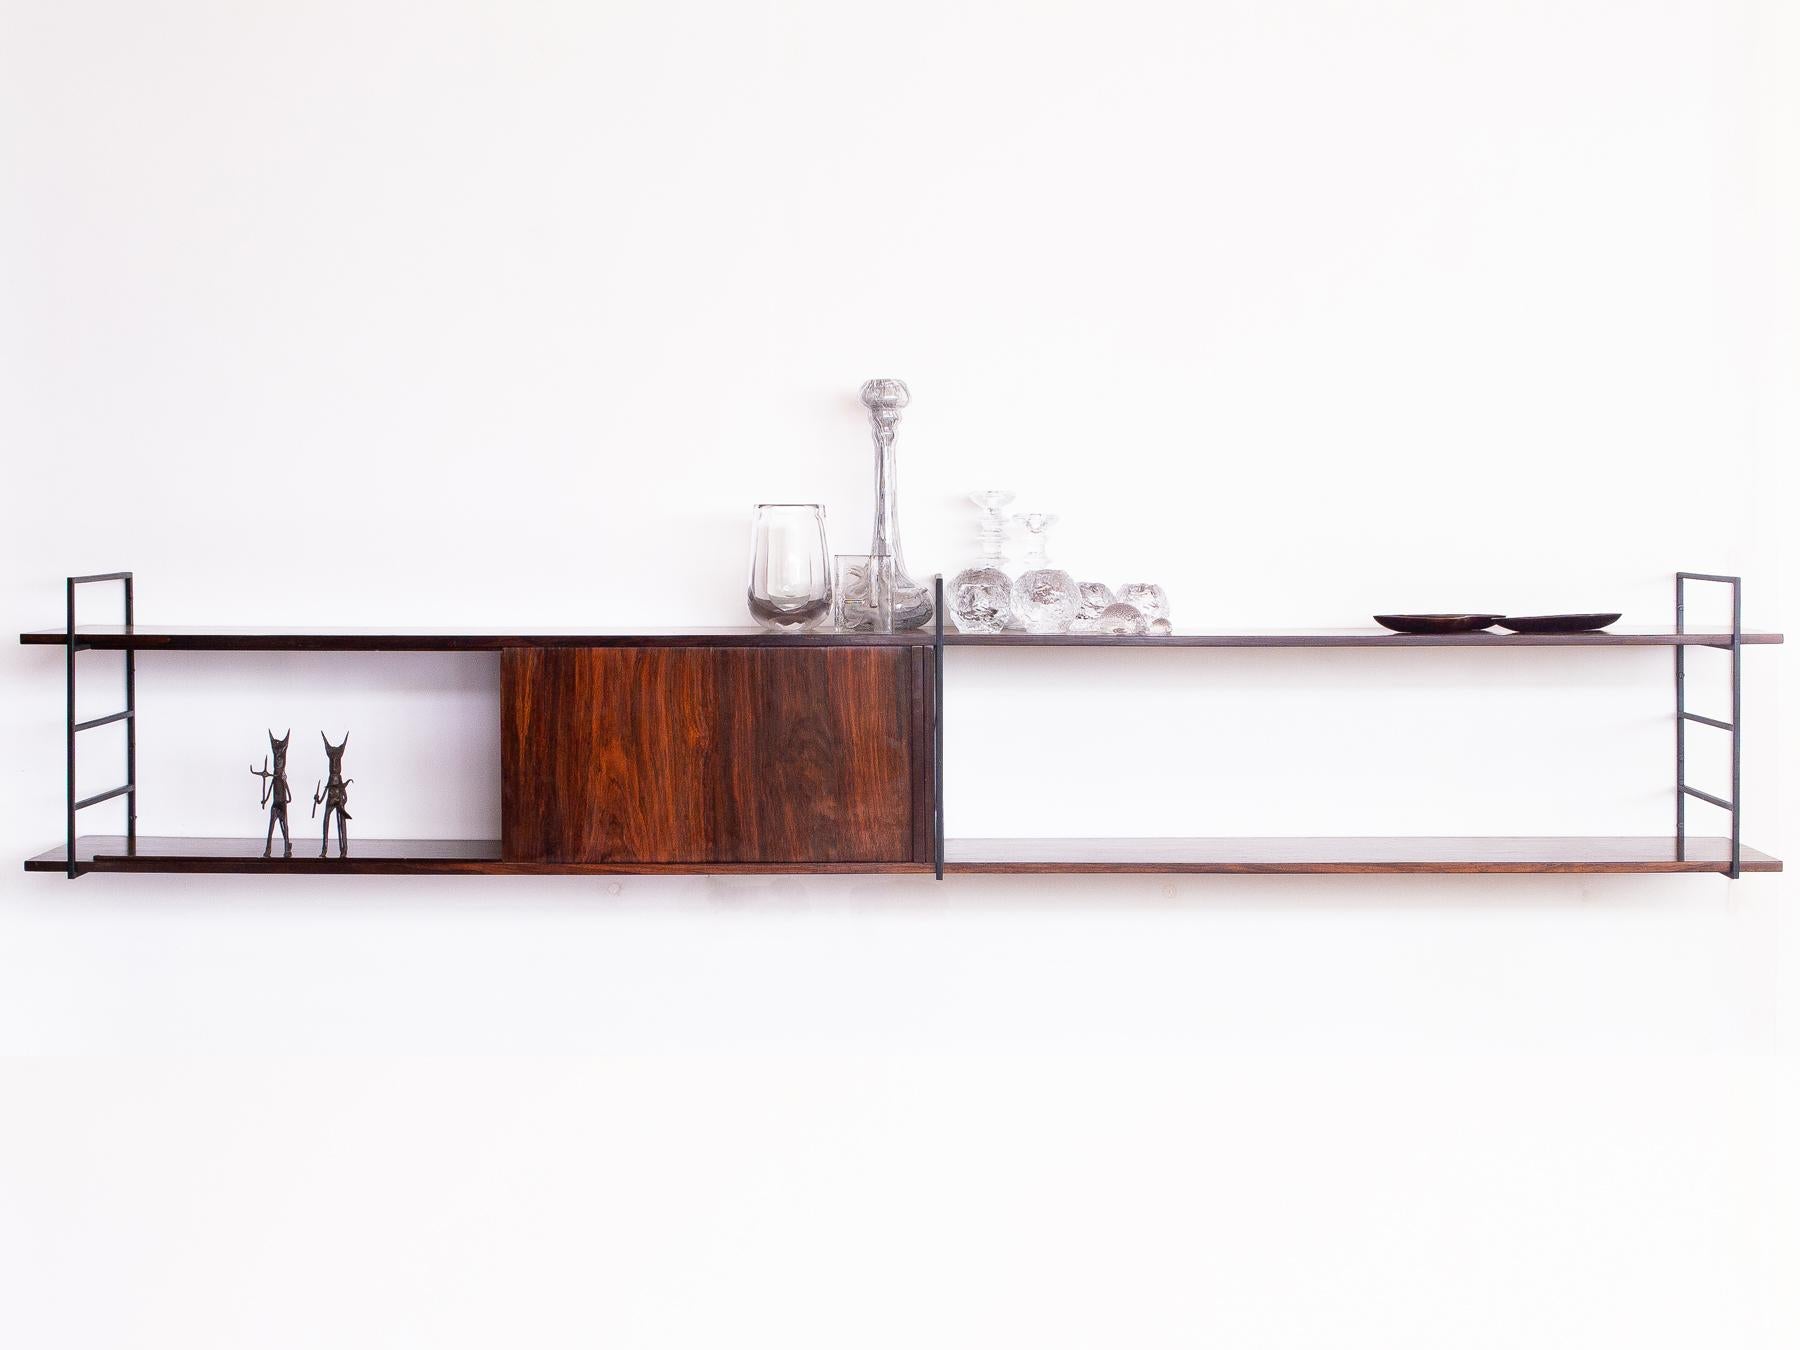 Amazing wide console with sliding door, produced in rosewood veneer and wrought iron. This beautiful minimalist piece floats on your desired height and looks great against light walls, making the rosewood tones stand out even more.